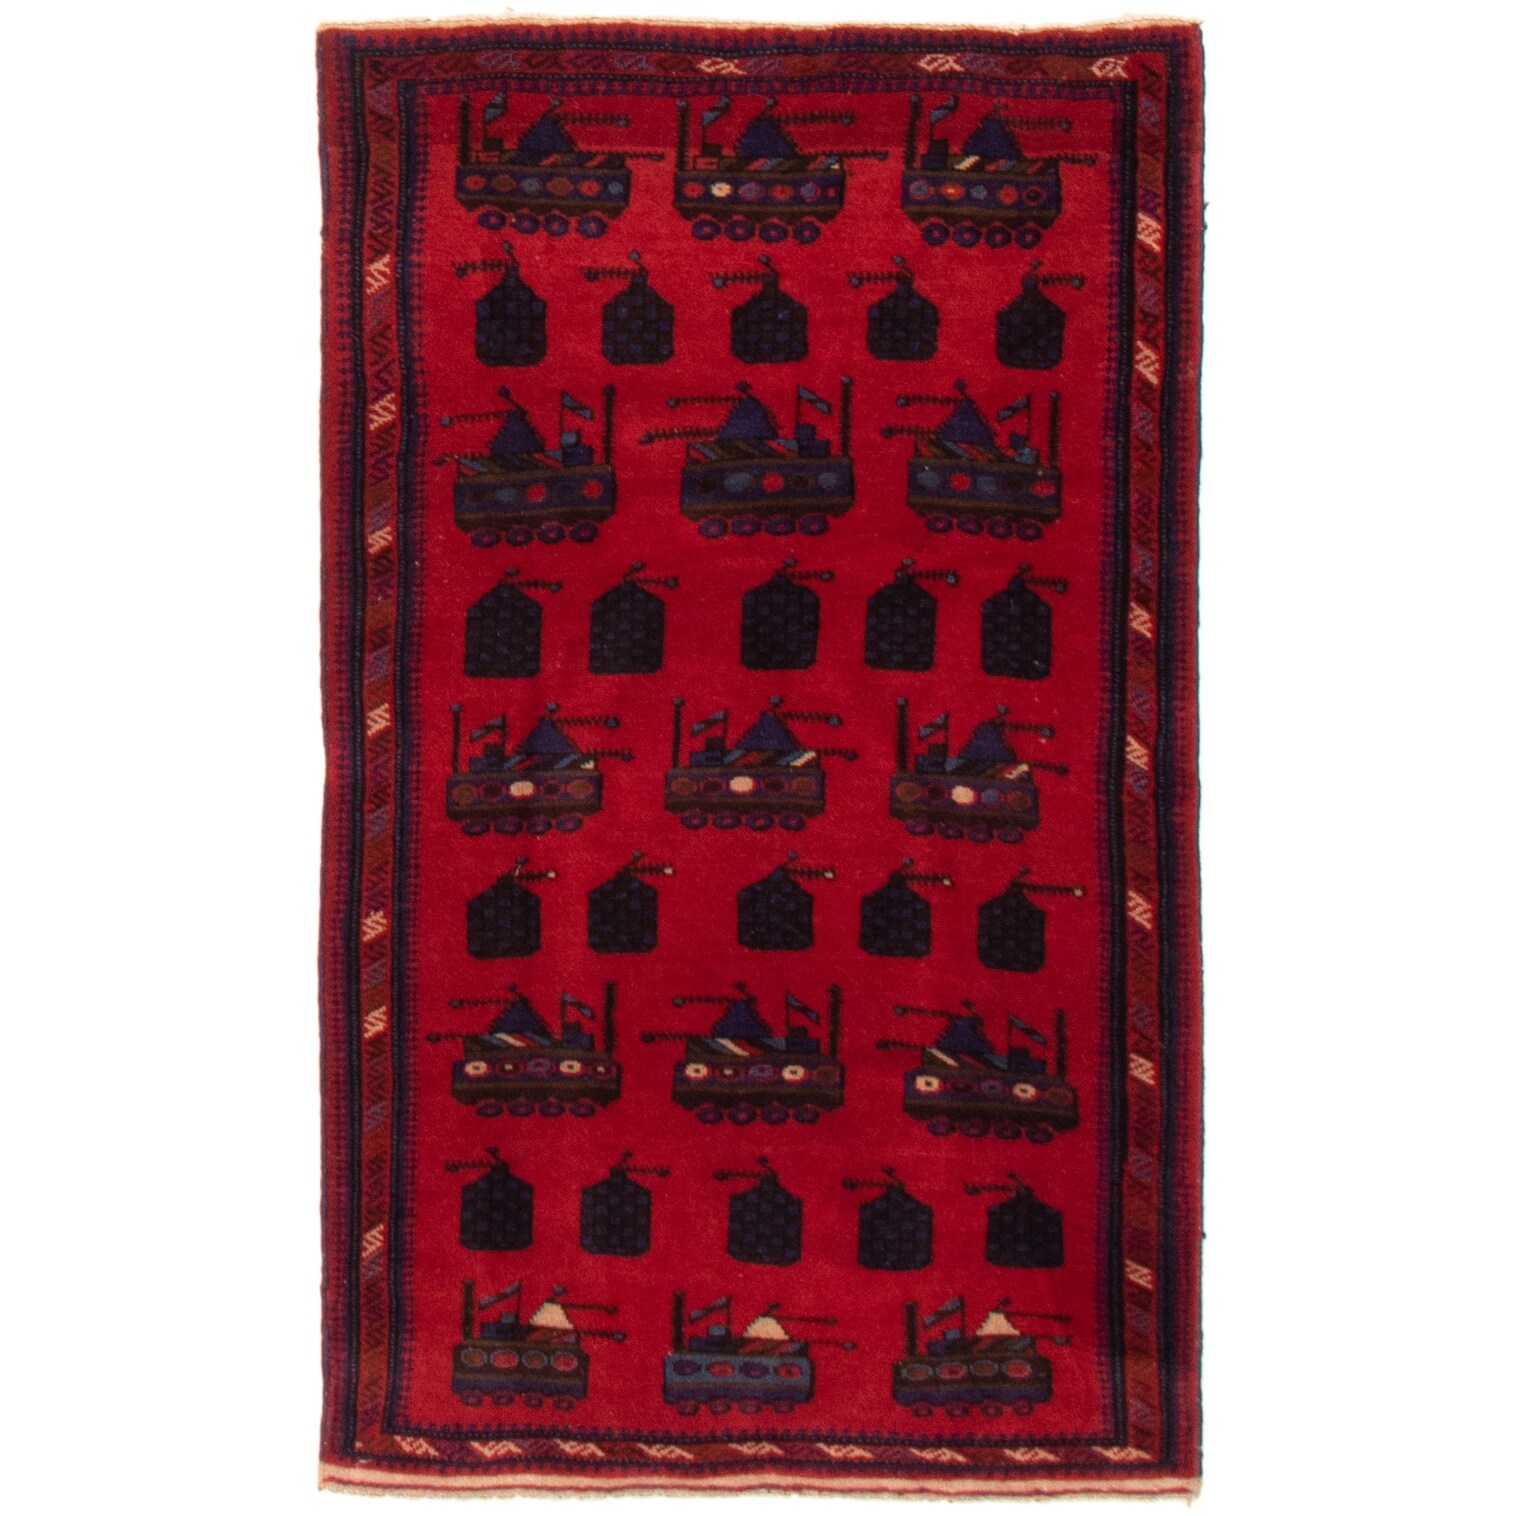 Hand-Knotted Wool Rug Rare War Bordered Red Rug 3'0 x 5'1 Bedroom 365614 eCarpet Gallery Area Rug for Living Room 